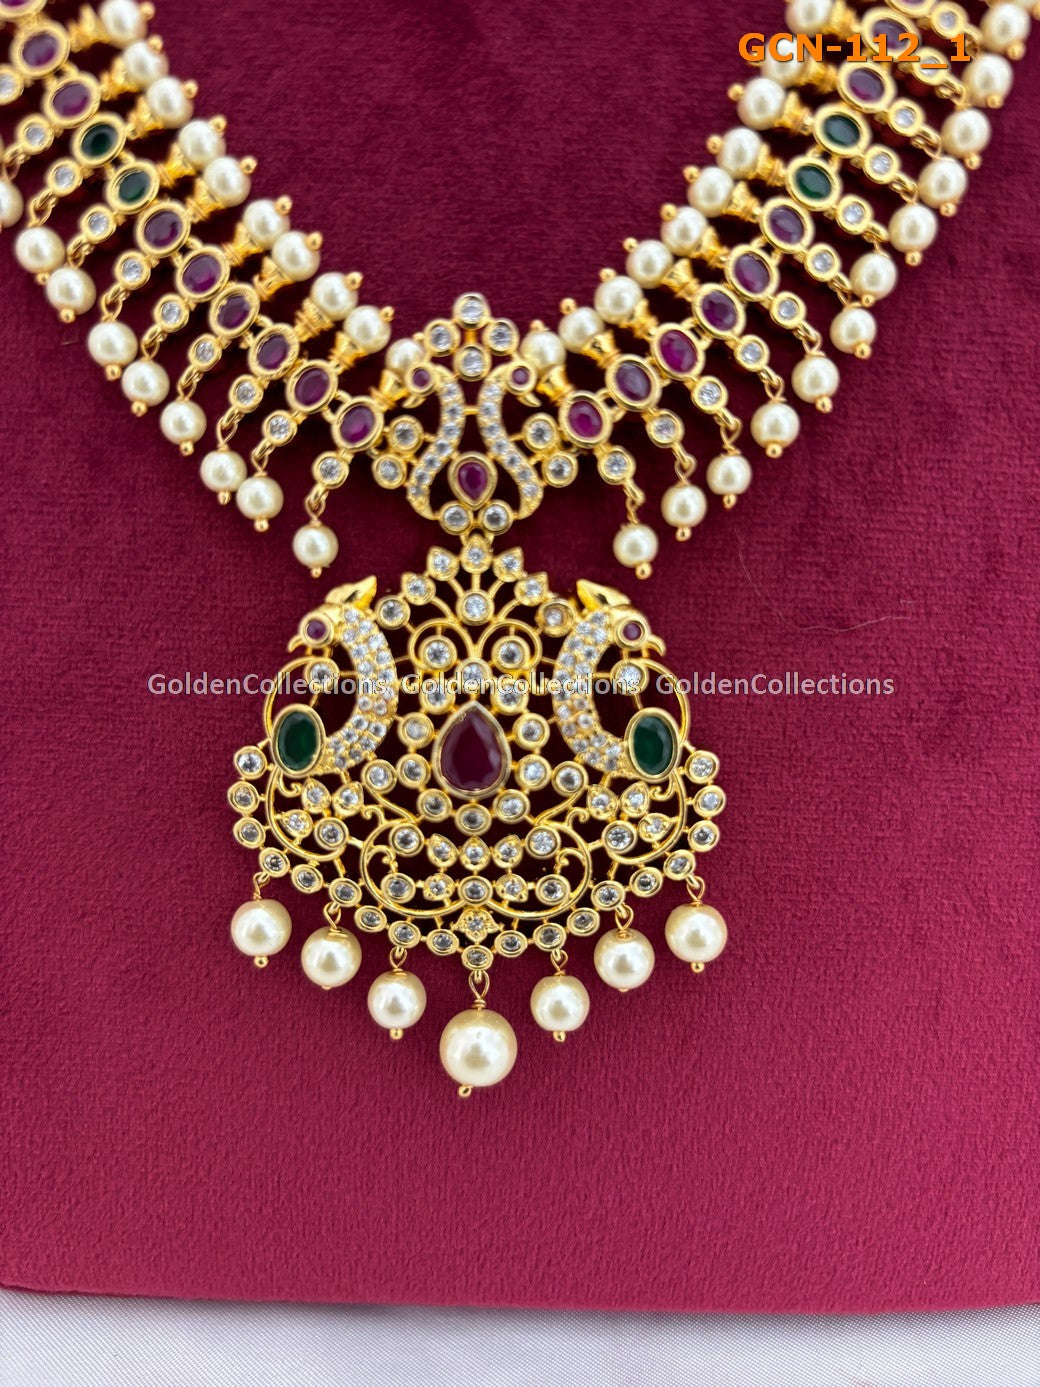 New Style Necklace Designs : Latest Fashion Necklace Designs GoldenCollections 2